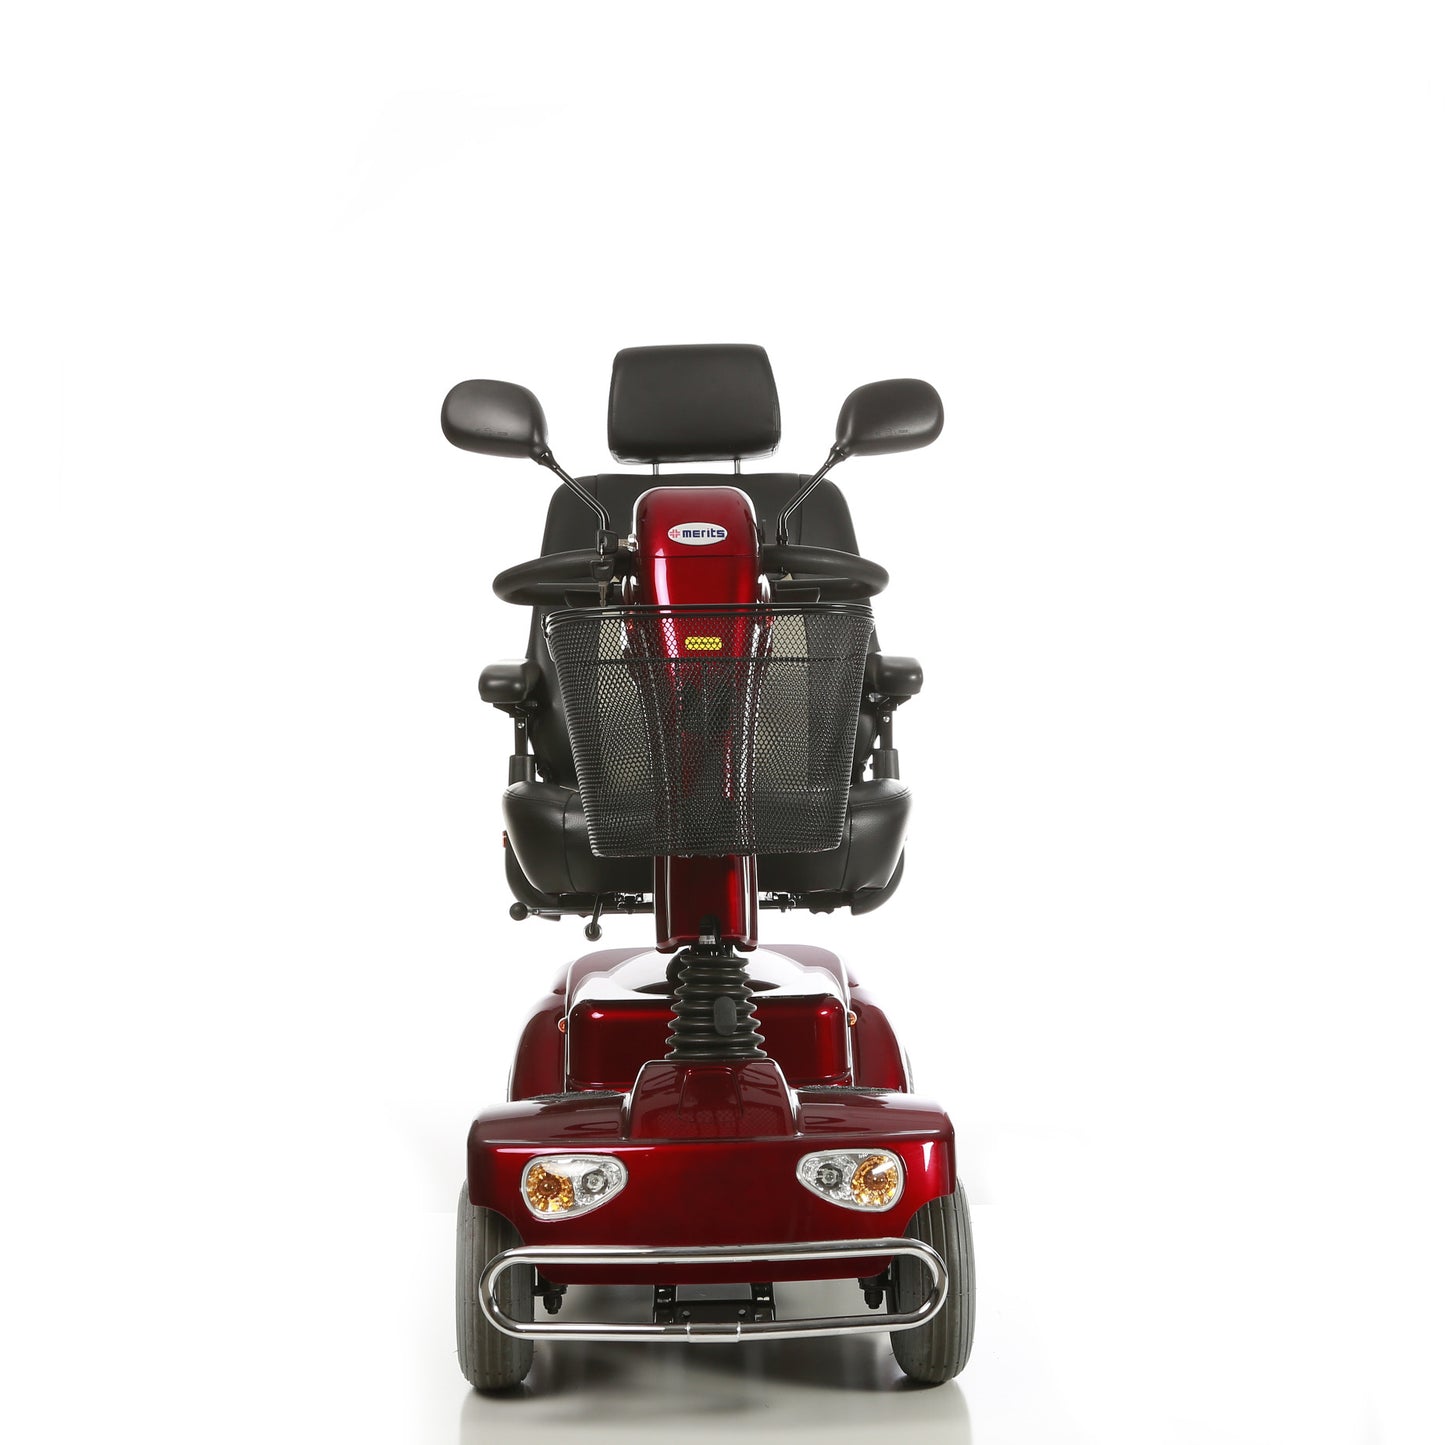 Merits S141 Pioneer 4 4-Wheel Mobility Scooter w/ Swivel Seat - Long Distance, Anti Flat Tires, w/ Lifetime Warranty, 400 Lbs Weight Capacity